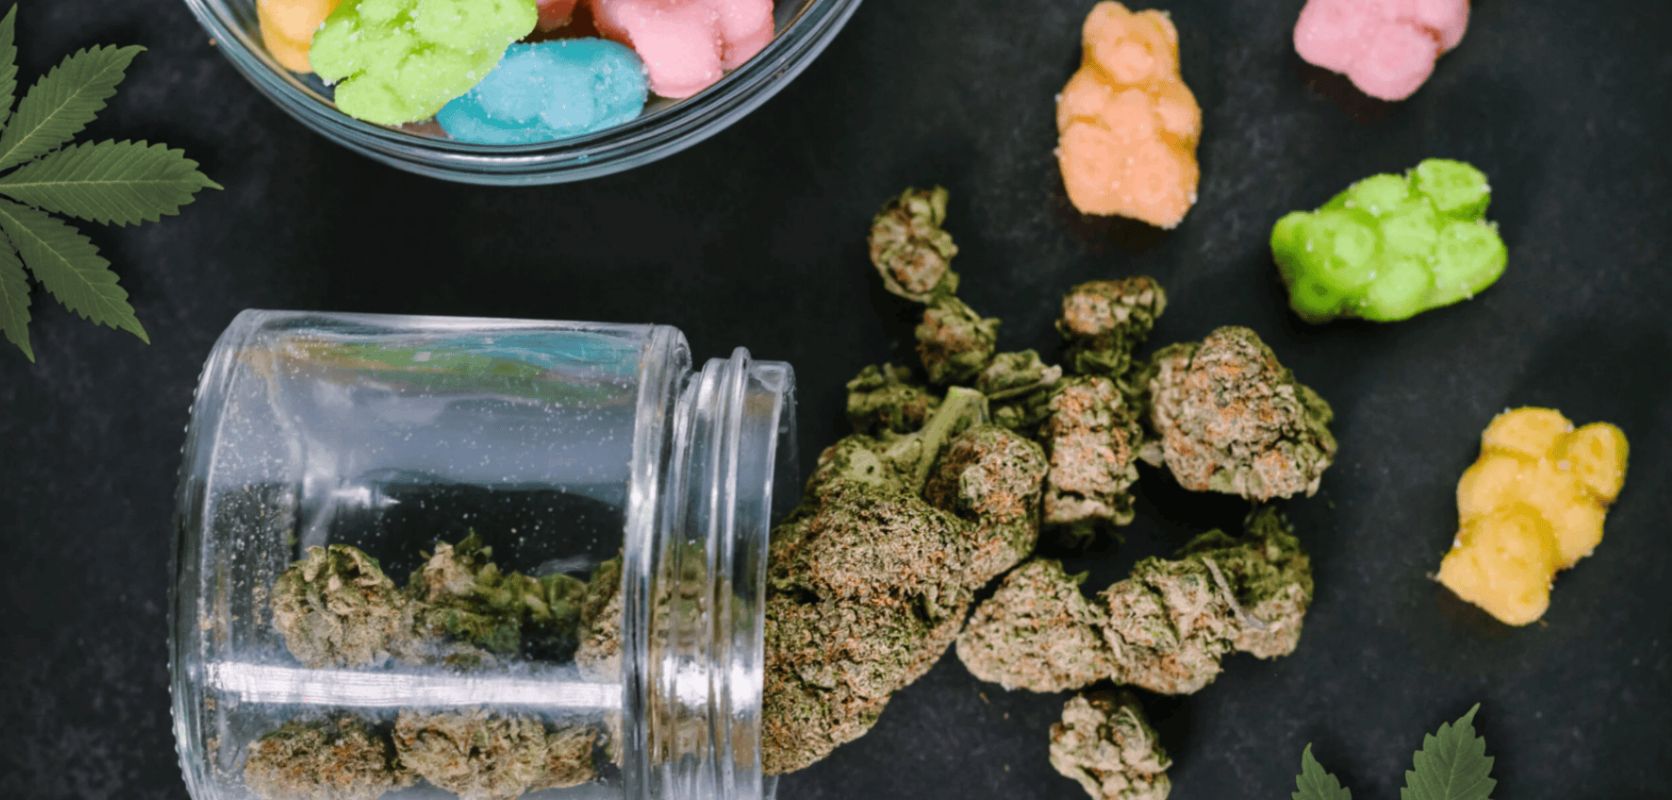 You've got yourself a stash of cannabis gummies, and you want to make sure they stay fresh and potent for as long as possible.